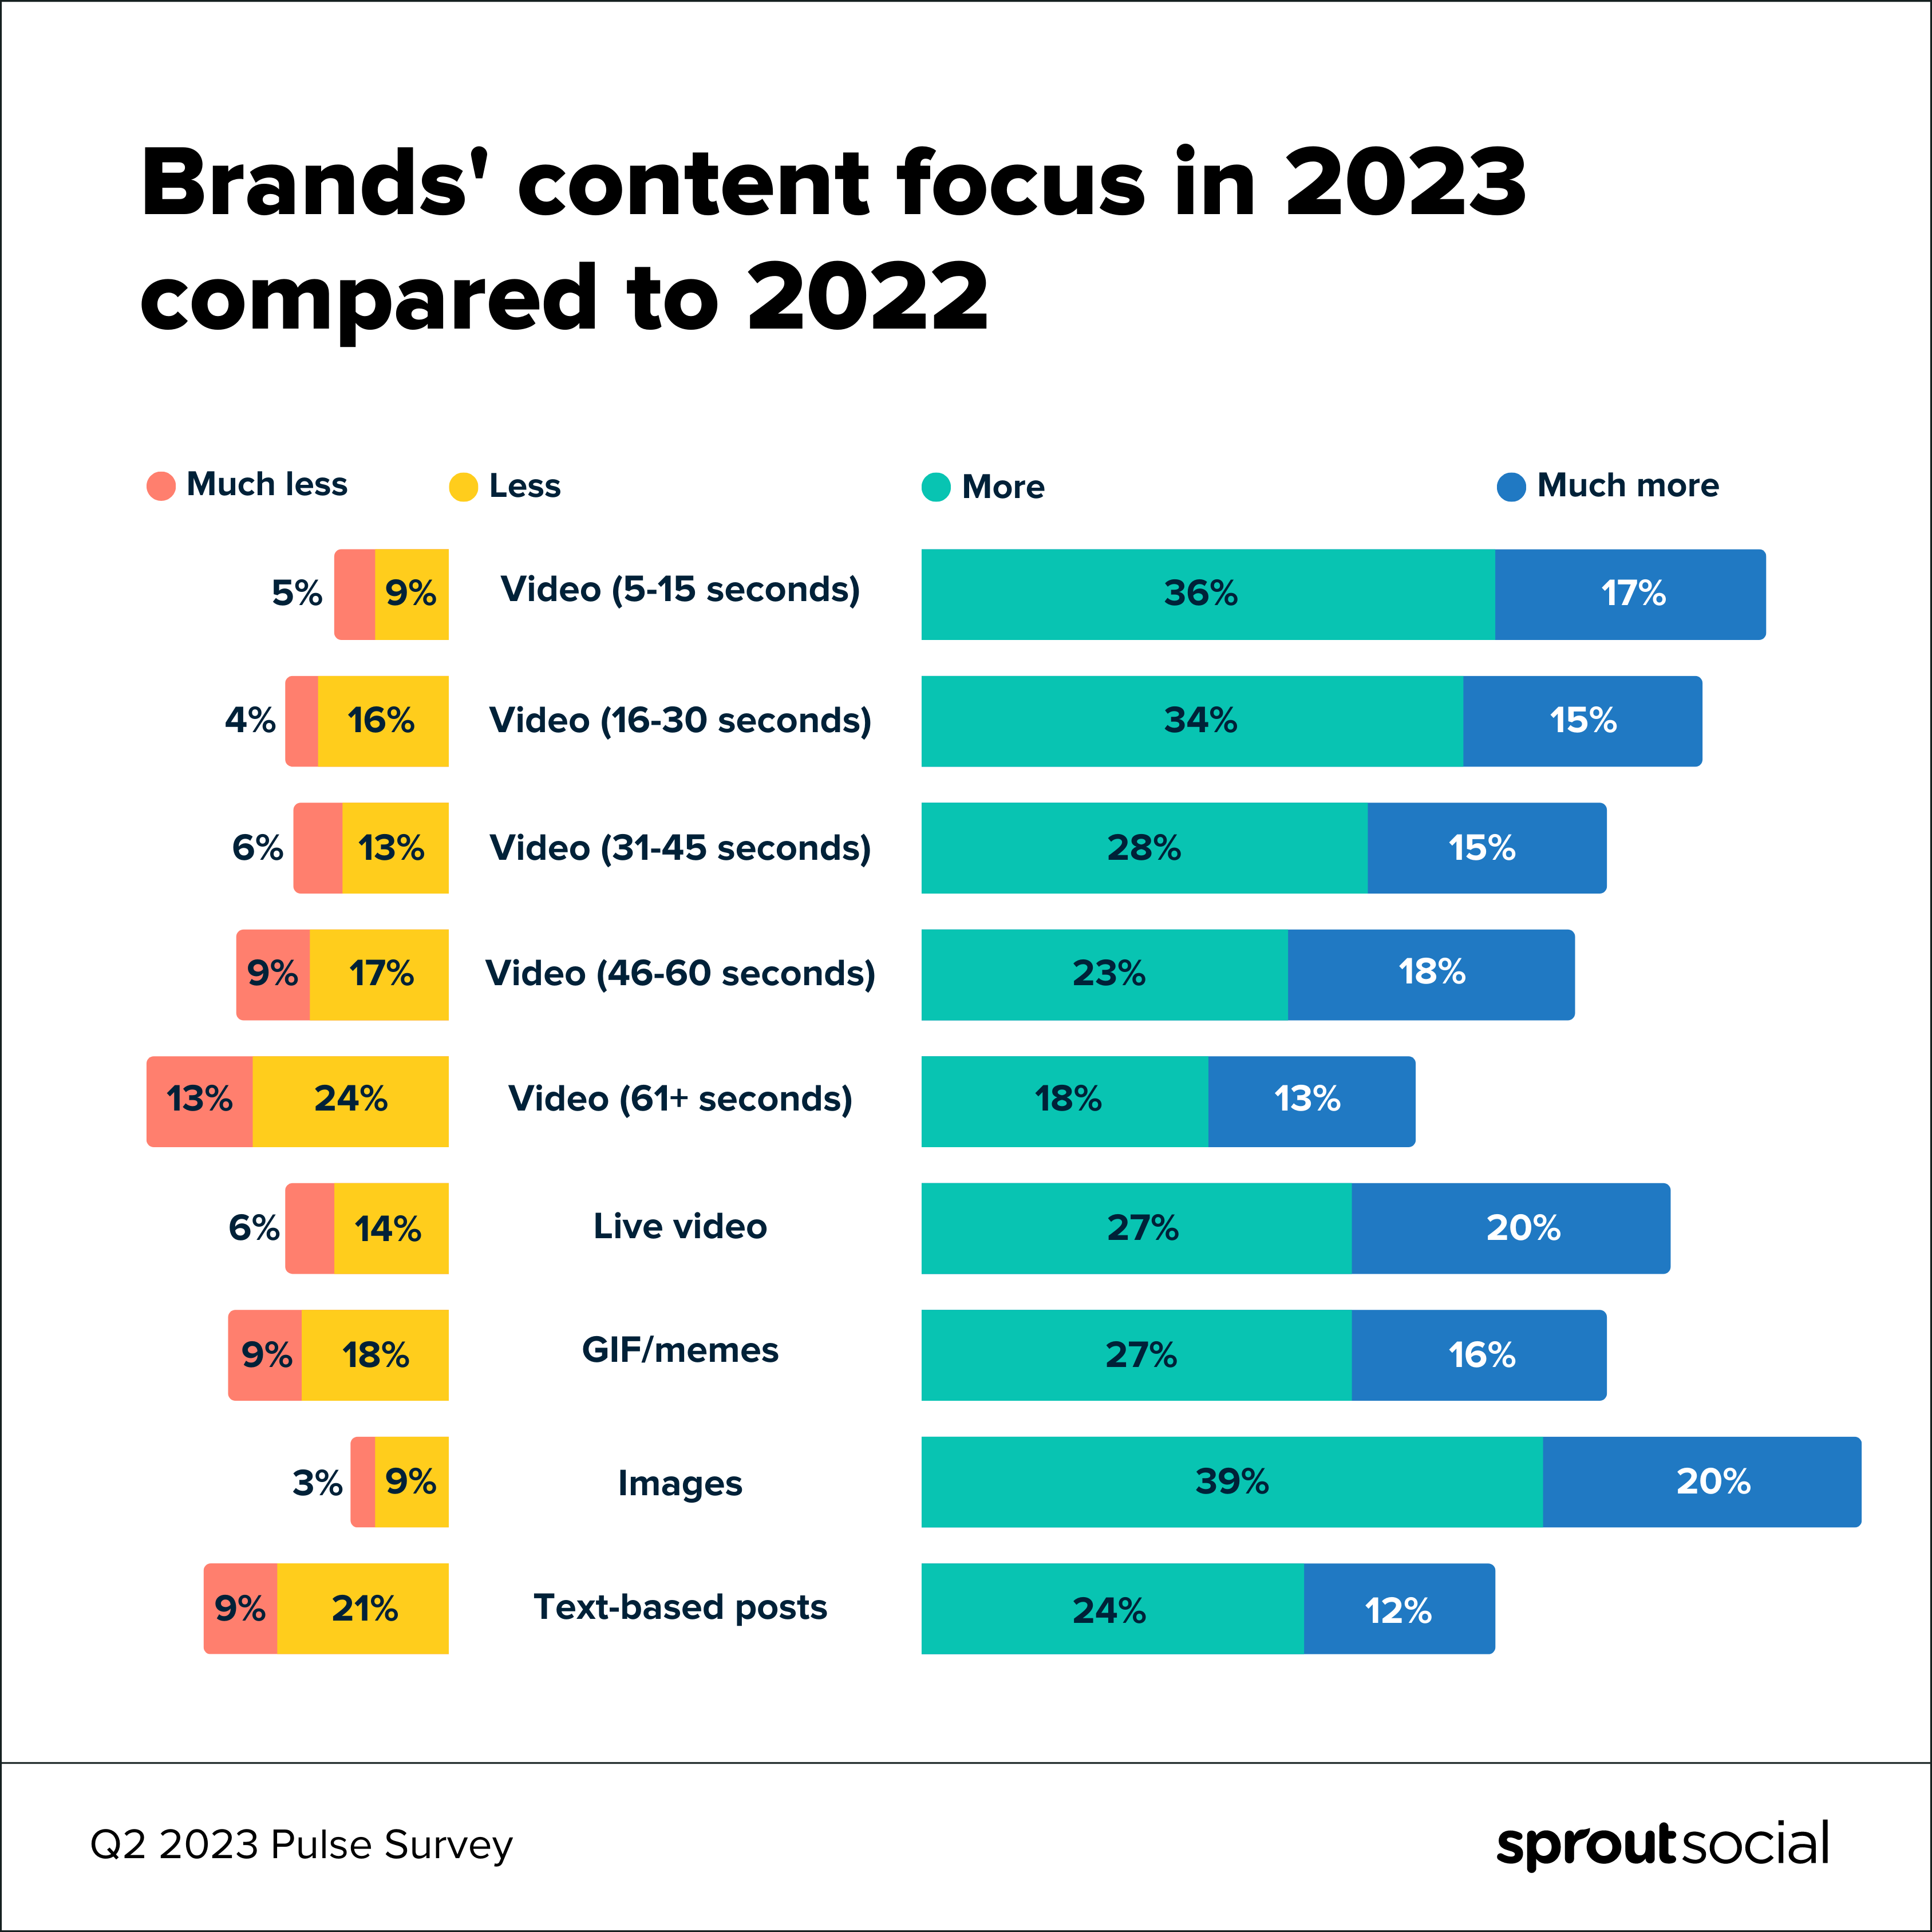 Sprout Social Q2 2023 Pulse Survey infographic reflecting brands' content focus in 2023 compared to 2022. Five to 15 second videos is listed as the top focus.